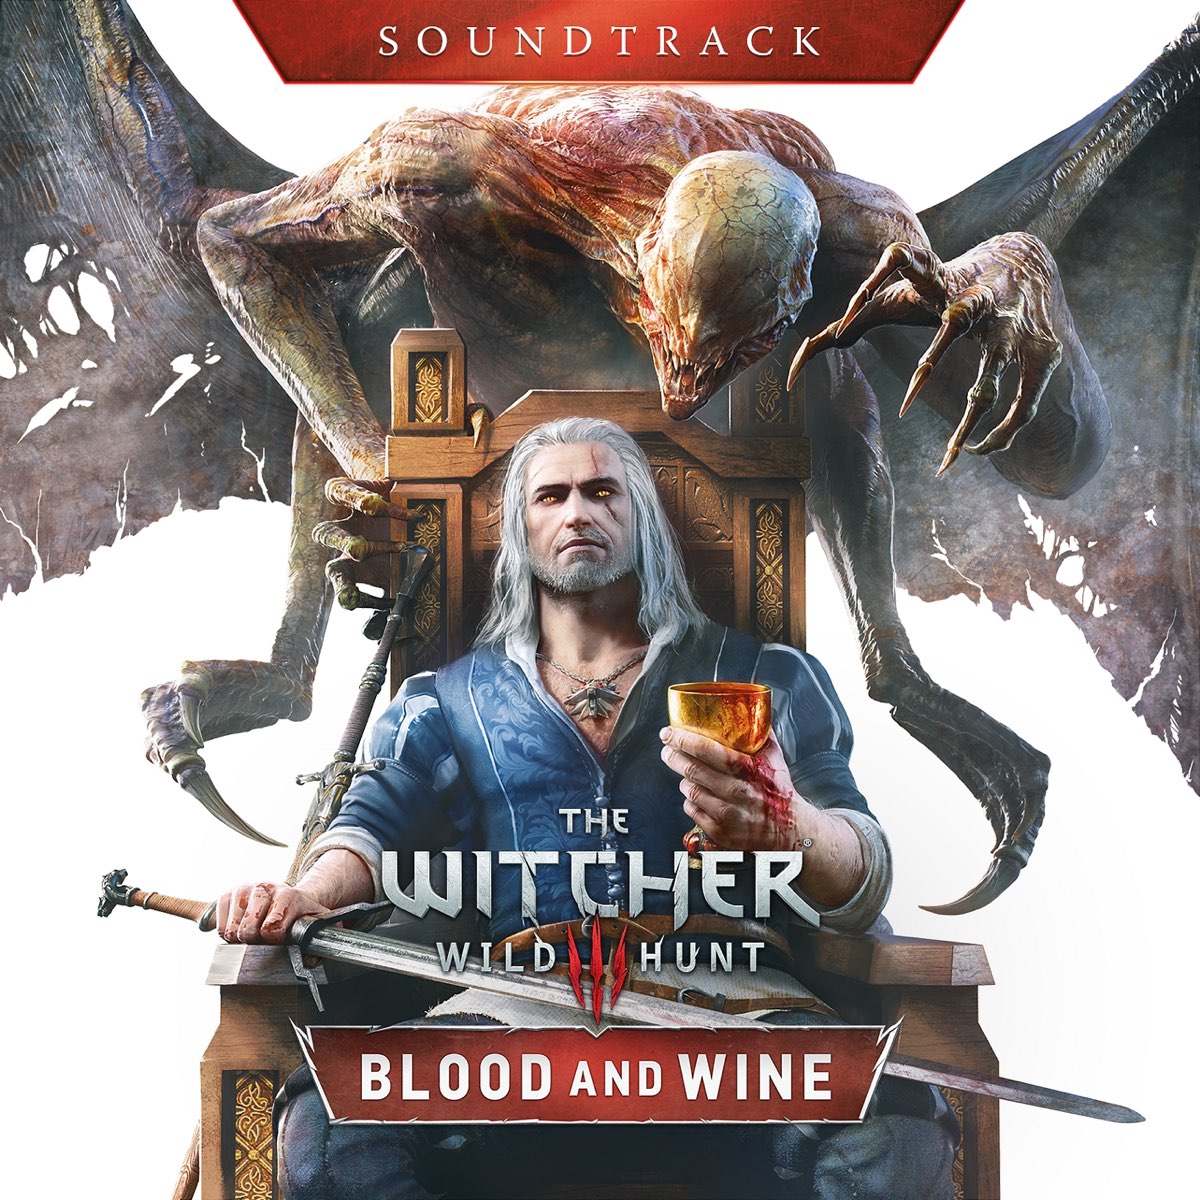 The witcher 3 blood and wine soundtrack (118) фото